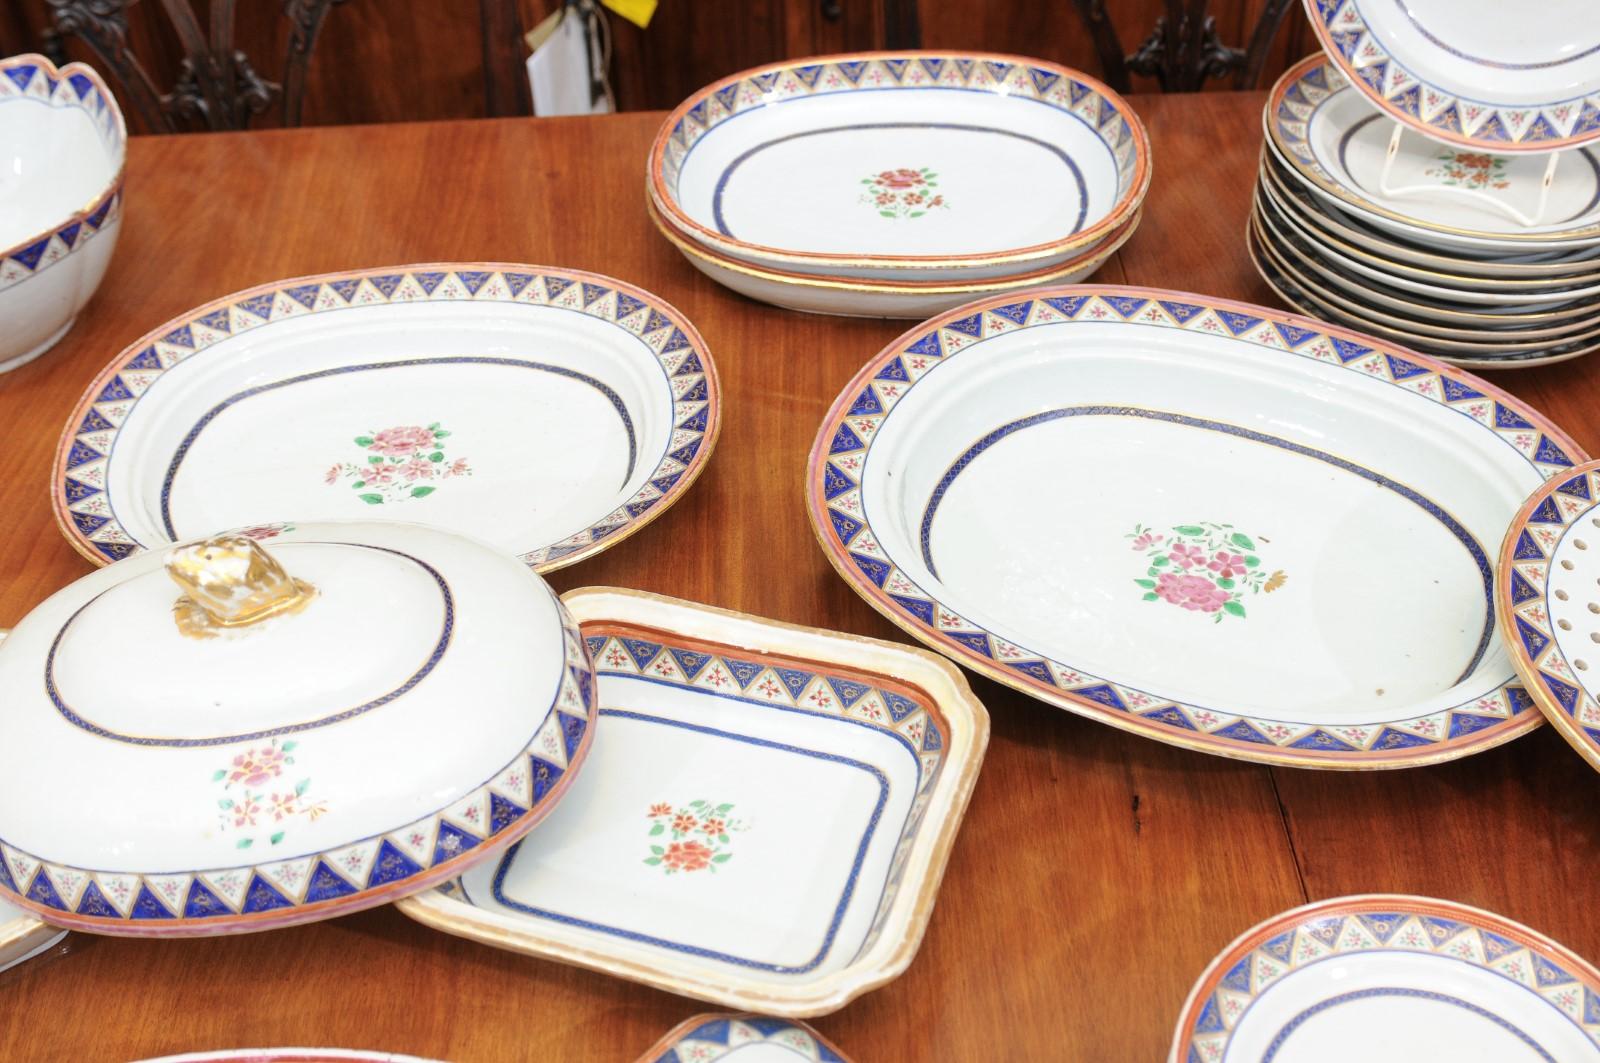 19th C. Chinese Export Famille Rose Porcelain Part-Dinner Service, 45 Piece Set For Sale 2